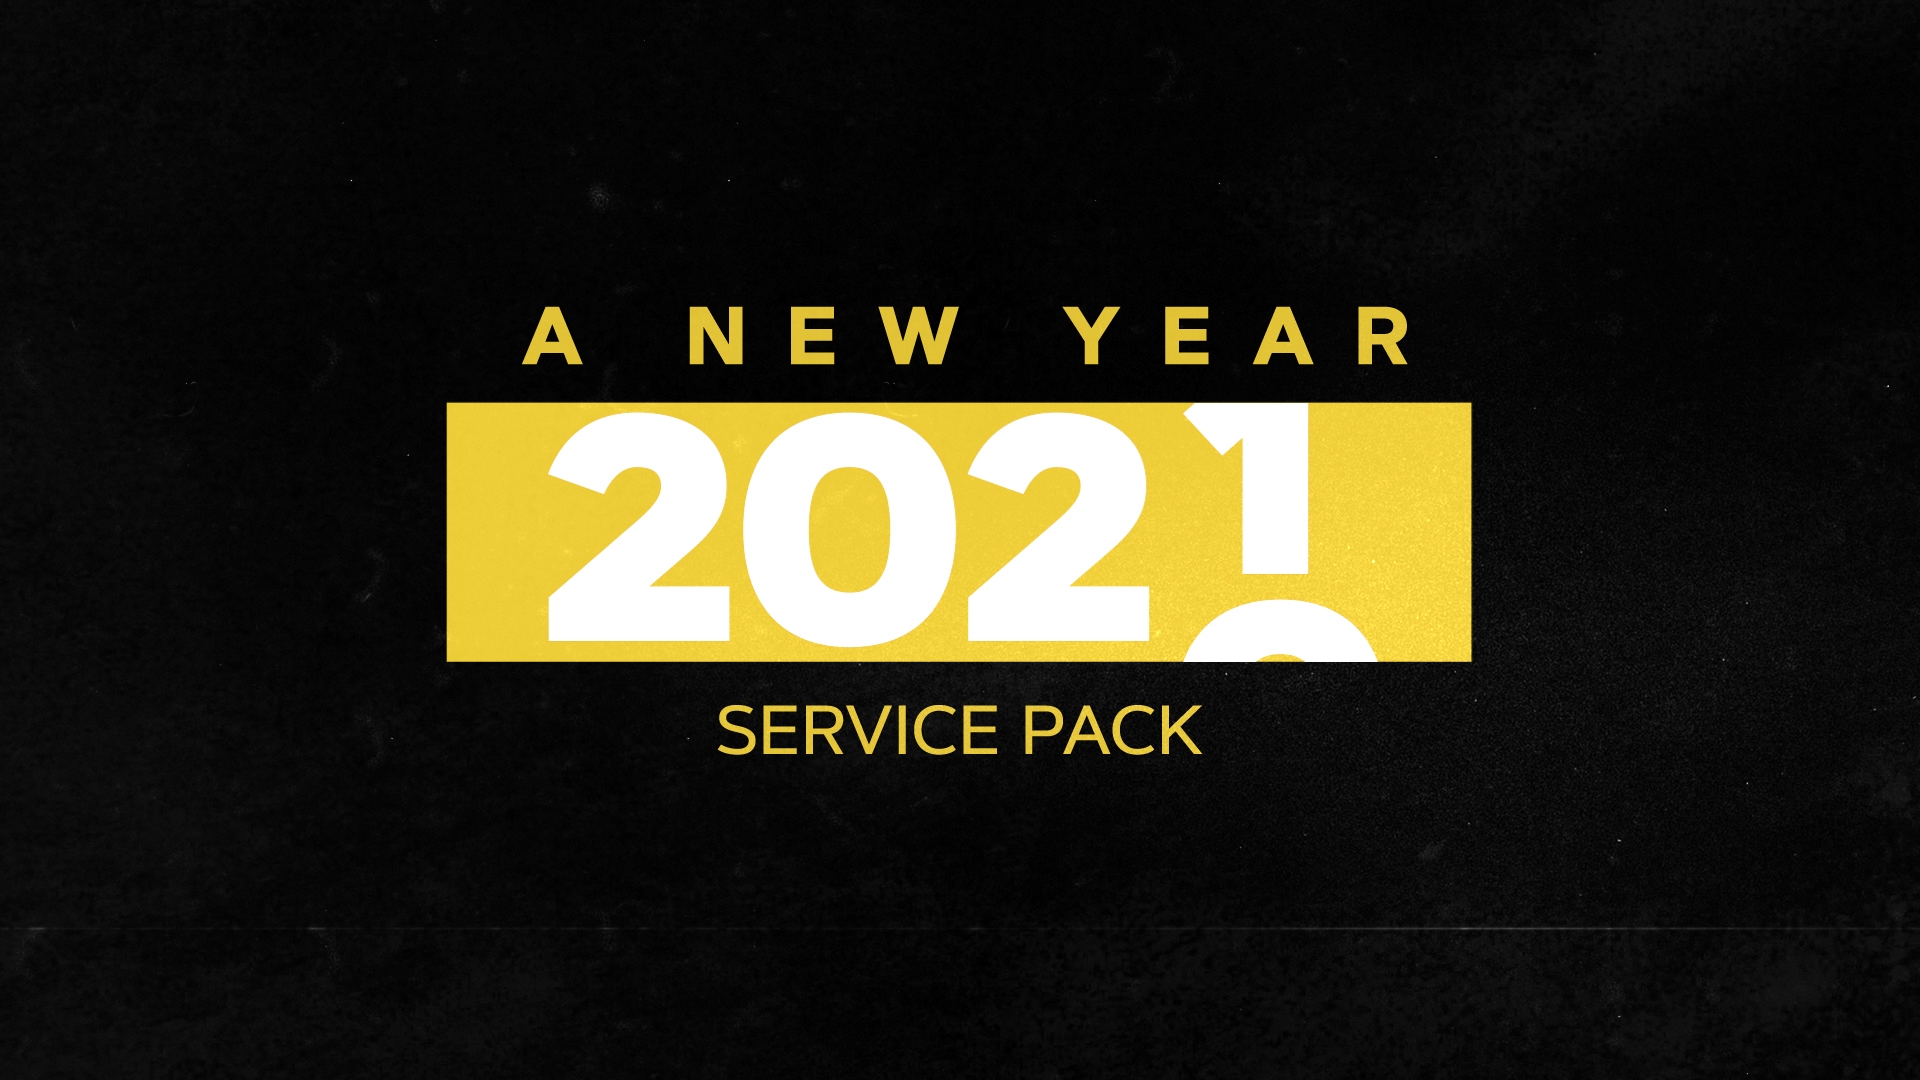 A New Year Service Pack